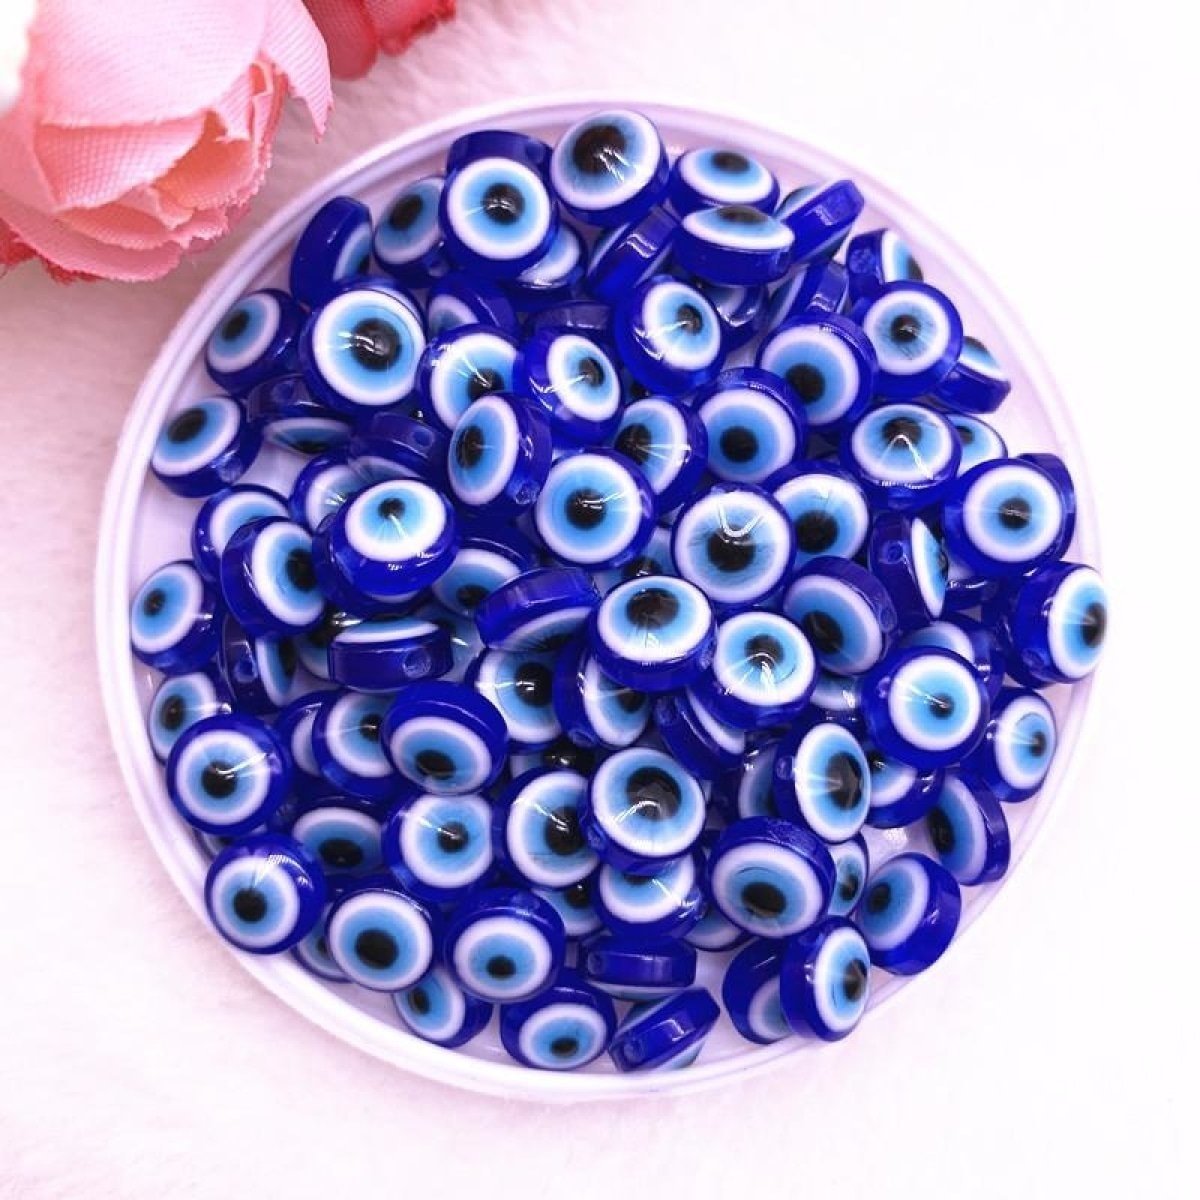 48pcs 8/10mm Oval Resin Spacer Beads Double Sided Eyes for Jewellery Making DIY Bracelet Beads Set B - Deep Blue 8mm - - Asia Sell